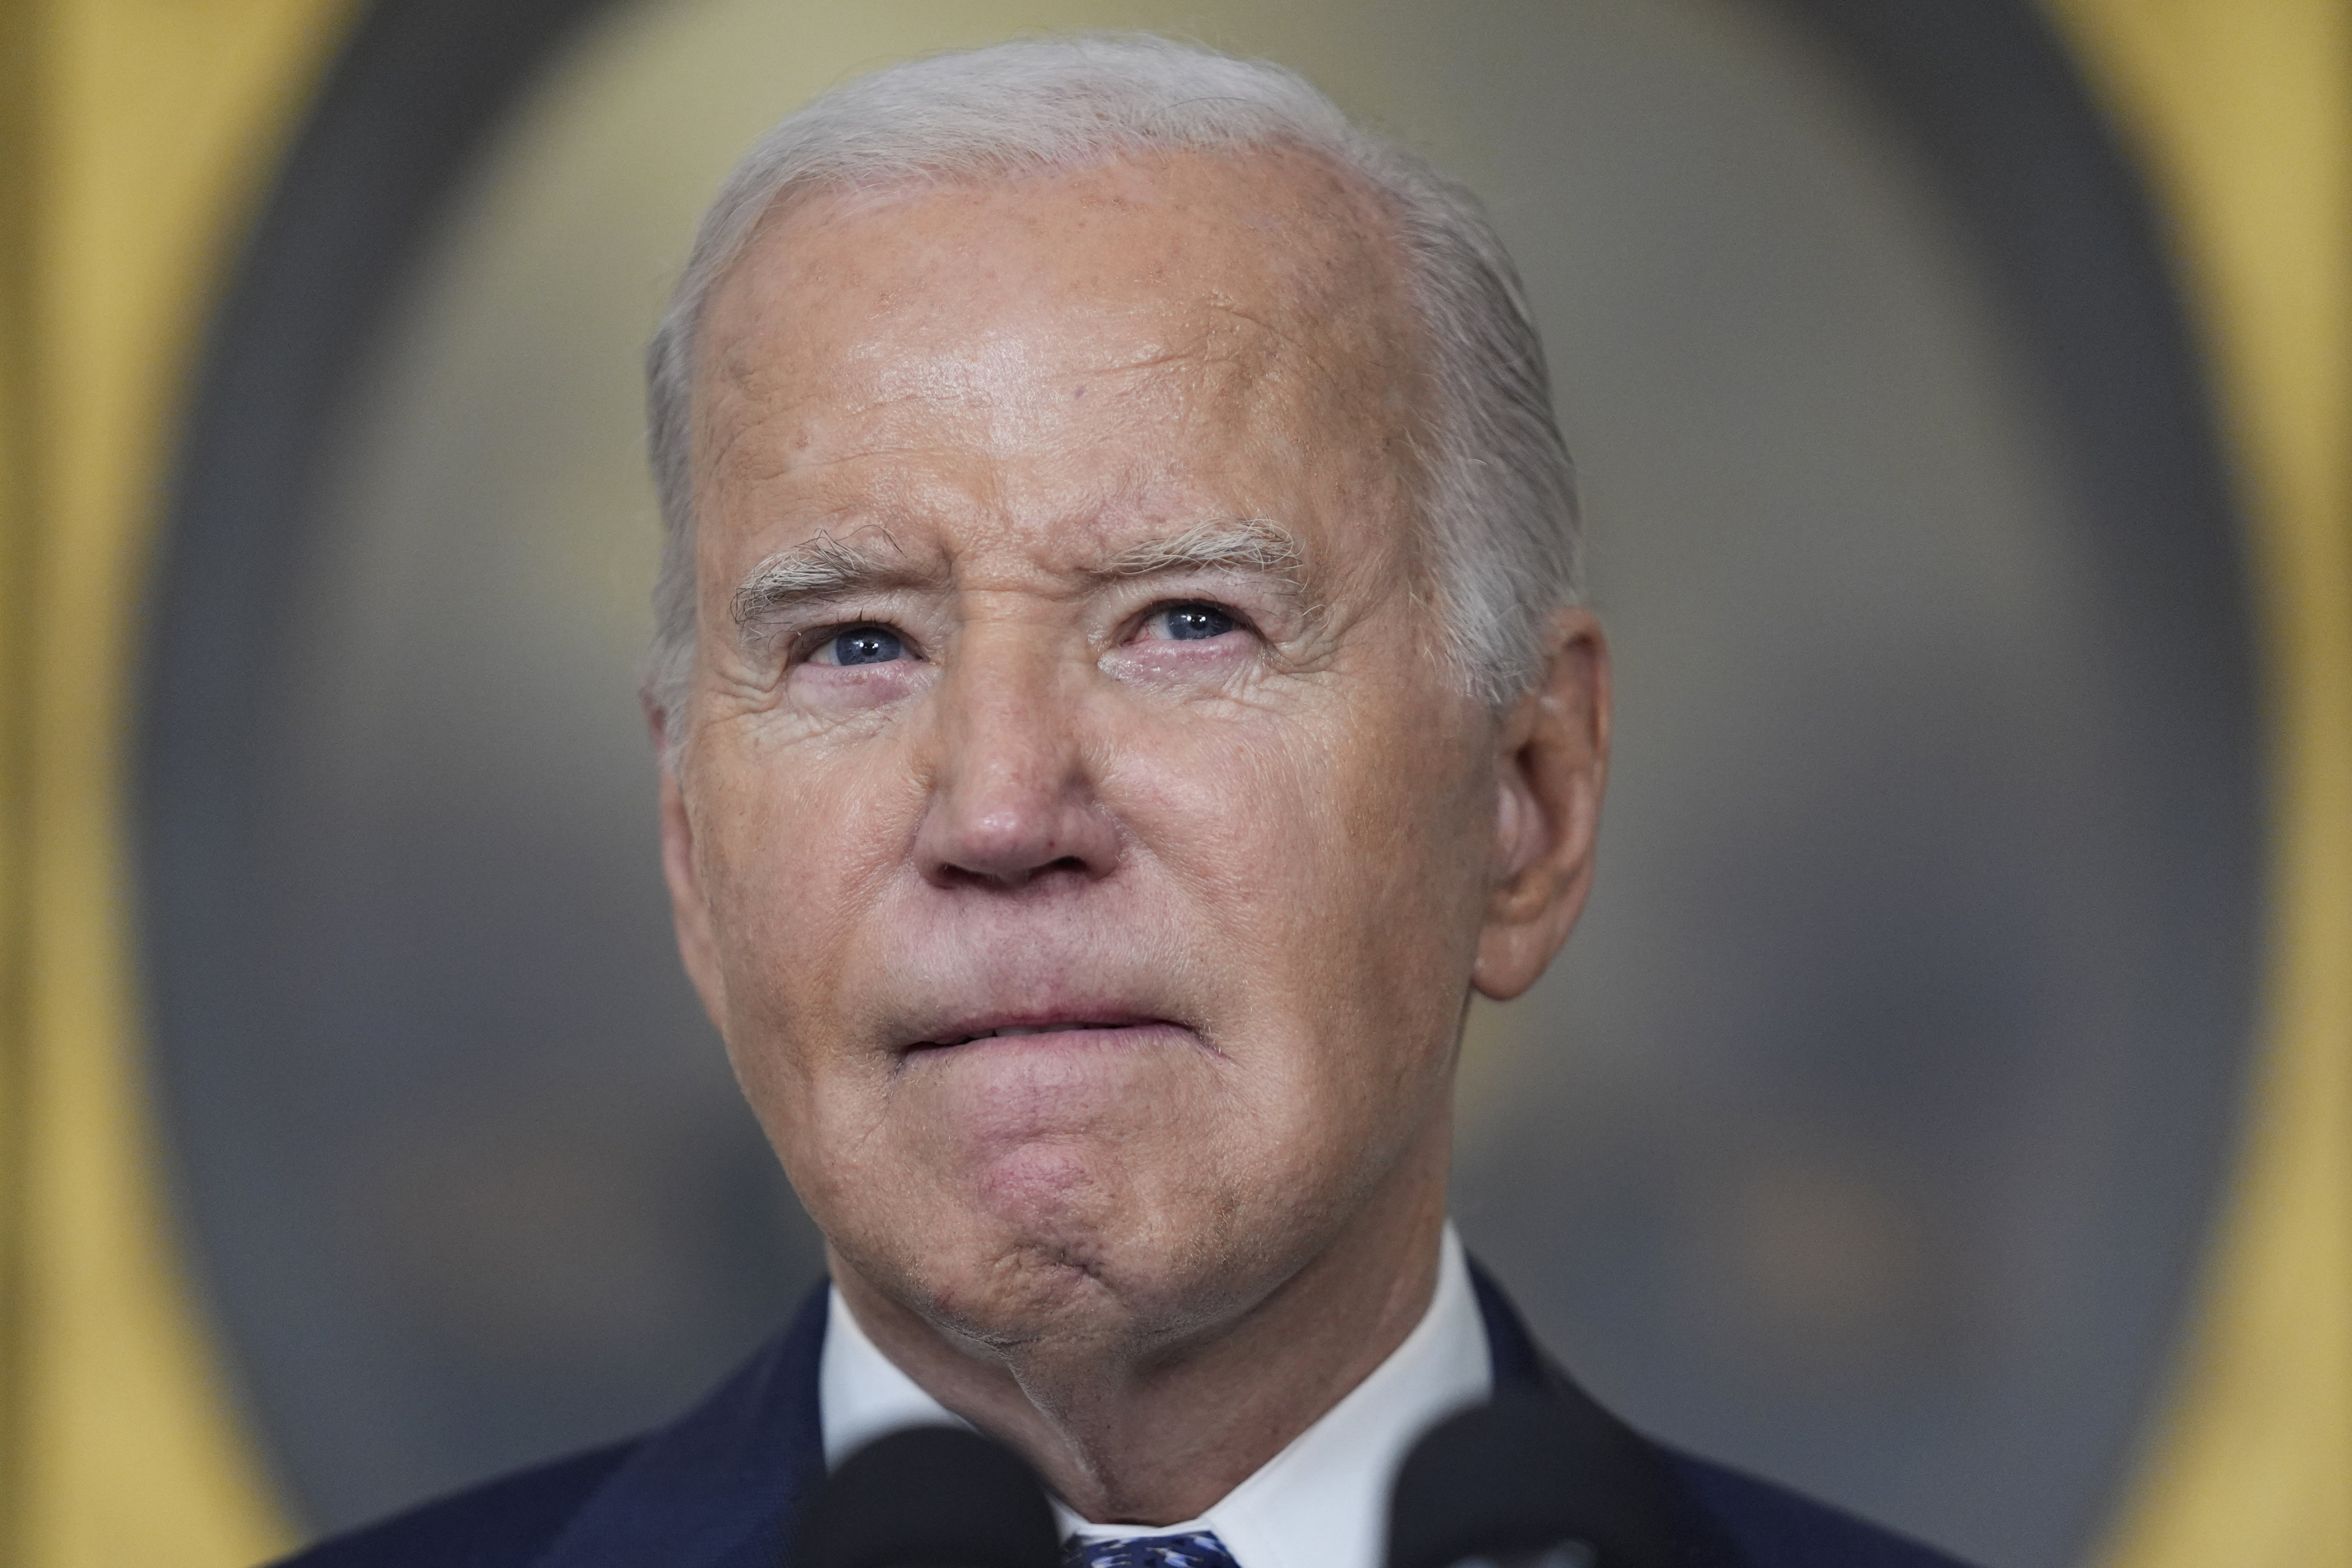 At 81, Joe Biden’s age has become a cause of concern among many US voters. Photo: AP